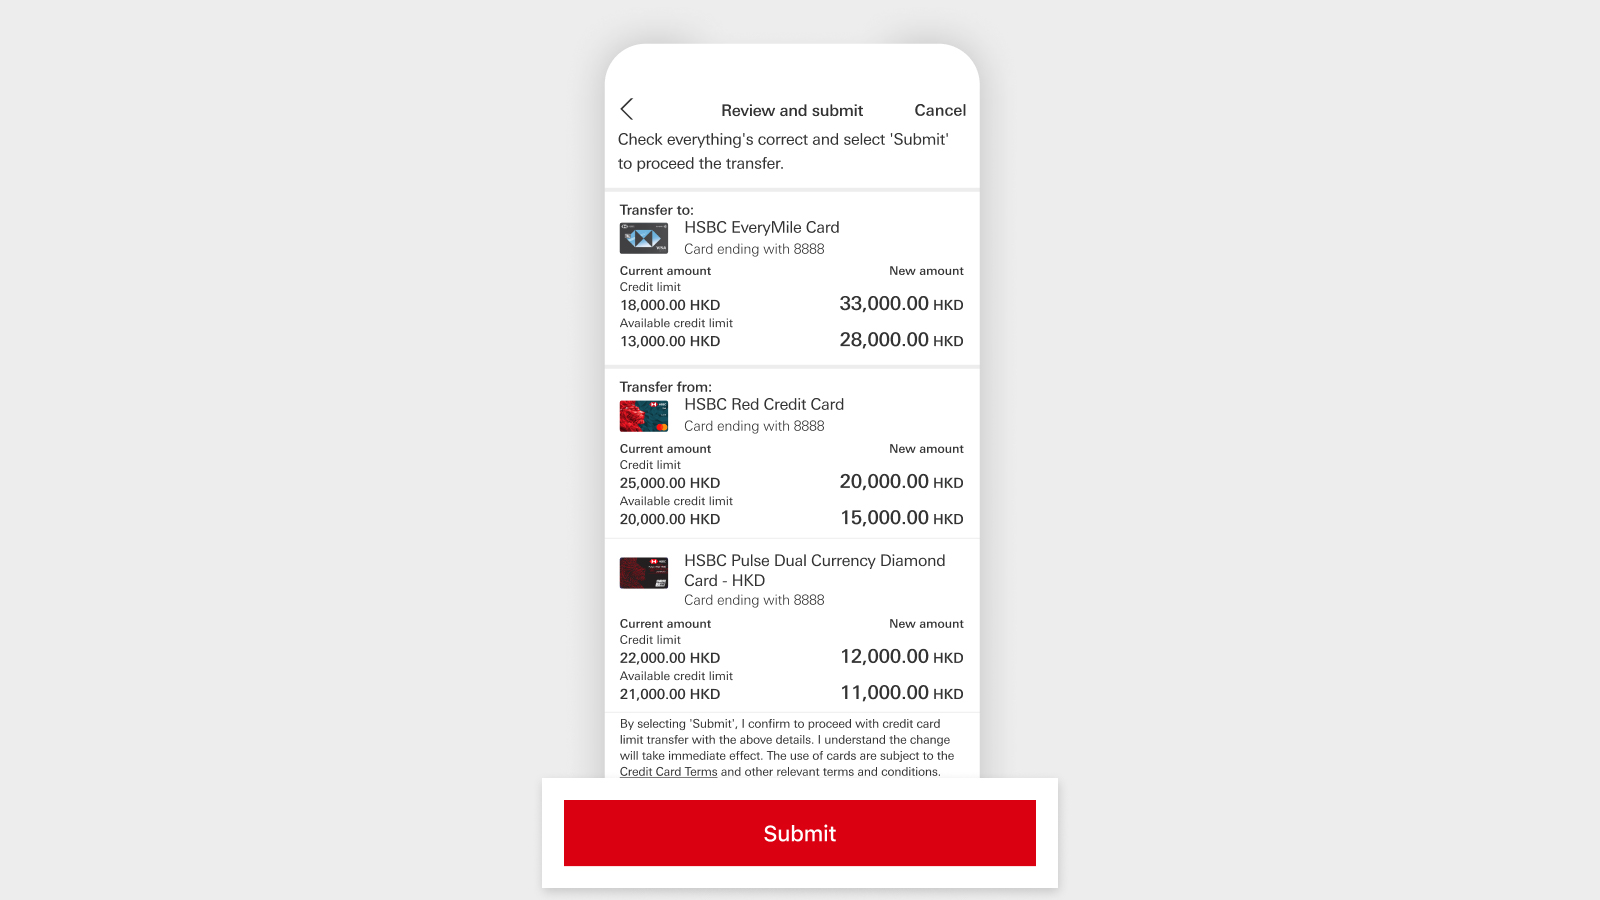 HSBC HK App screen with "Submit" button highlighted.